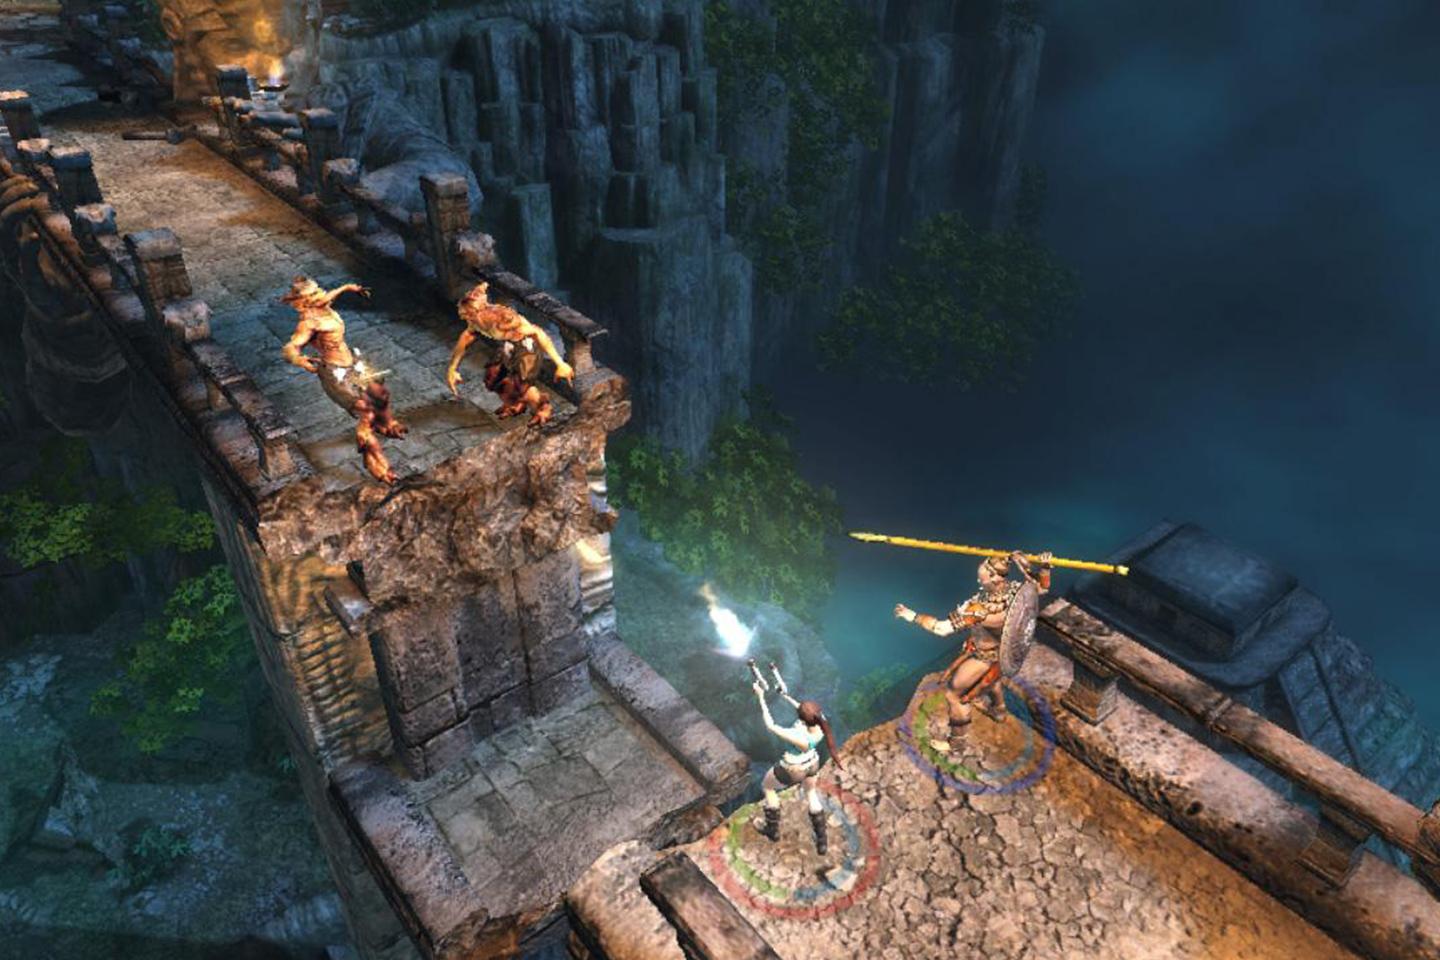 A strategic combat scenario from a Tomb Raider game with characters engaging enemies on a stone bridge above a gorge, under the glow of magical artifacts.